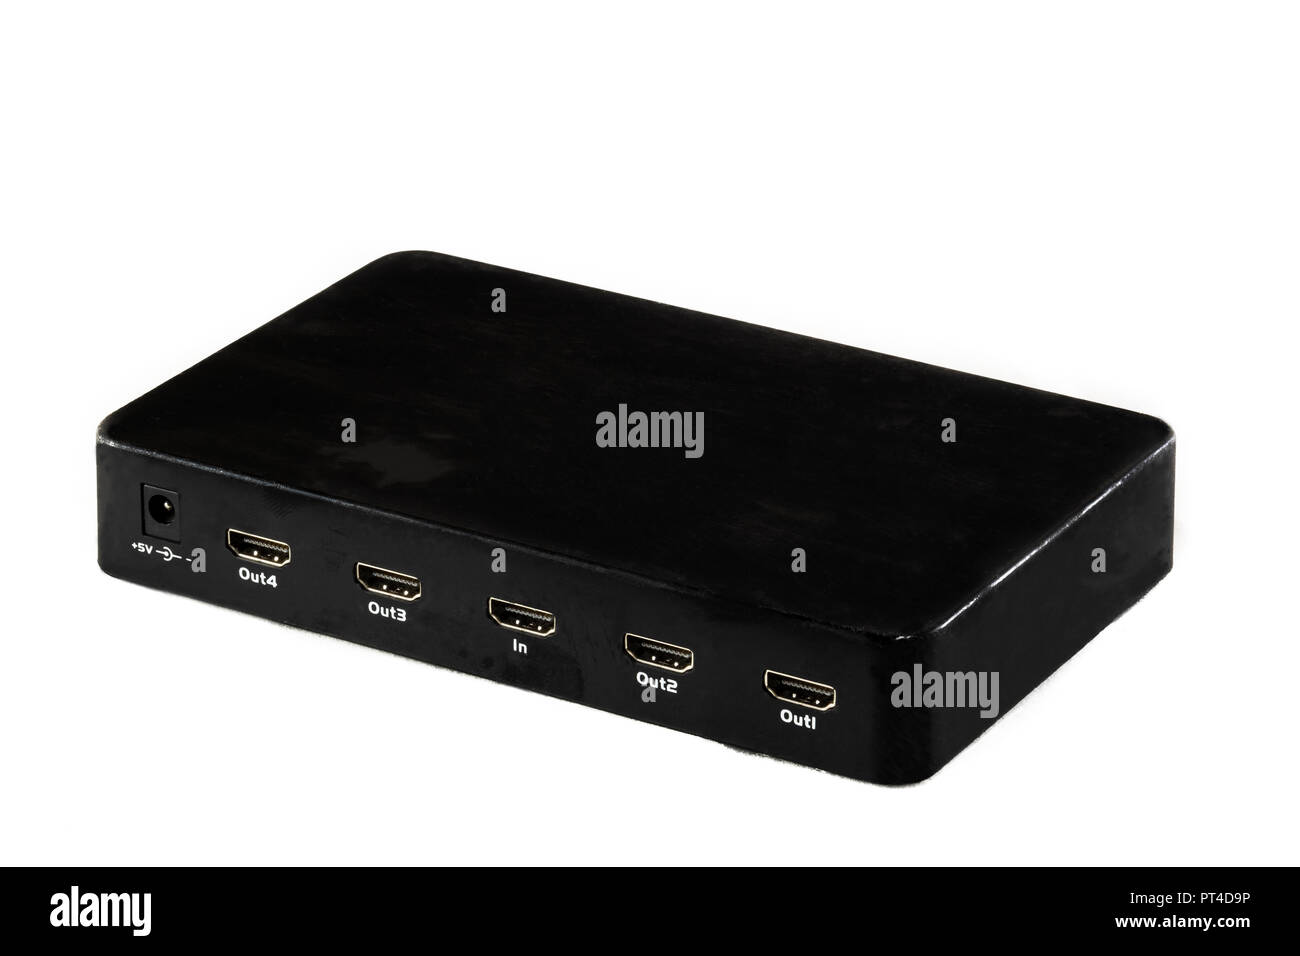 Black HDMI digital video four port splitter on white background with copyspace. Electronic equipment for multiple televisions connection. Stock Photo